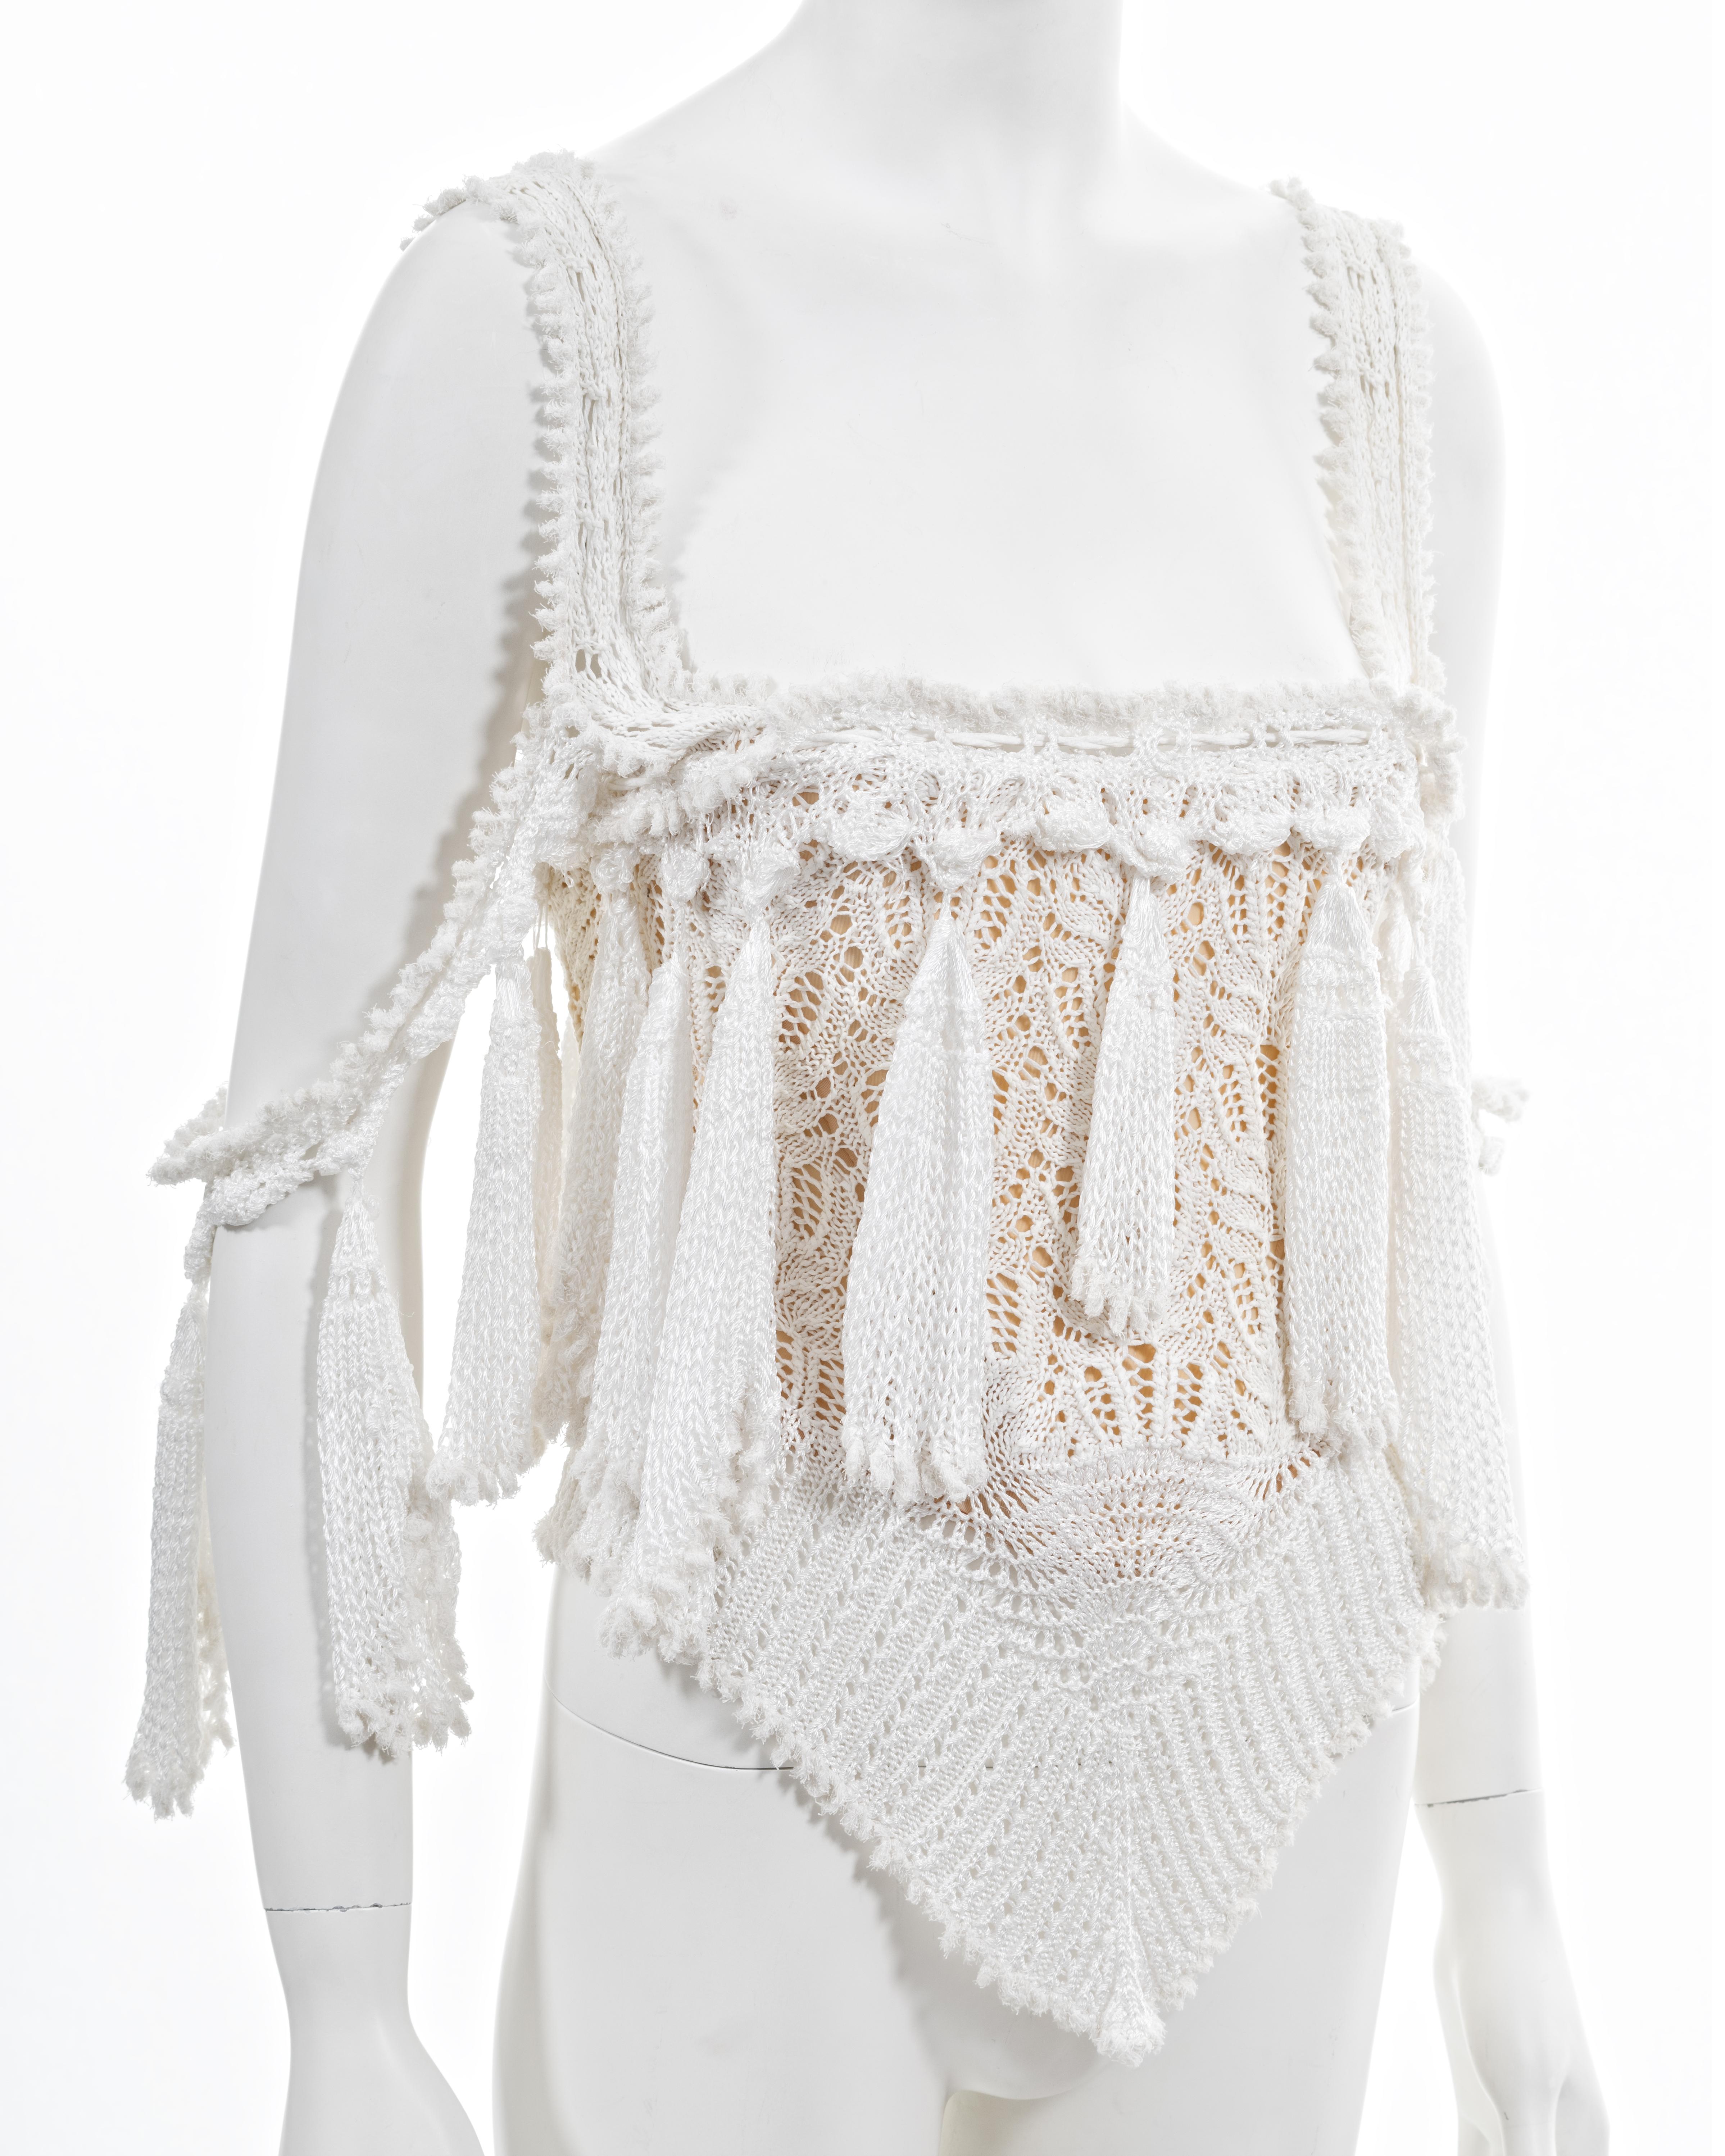 Vivienne Westwood 'Cafe Society' white knitted lace corset, ss 1994 For Sale 3